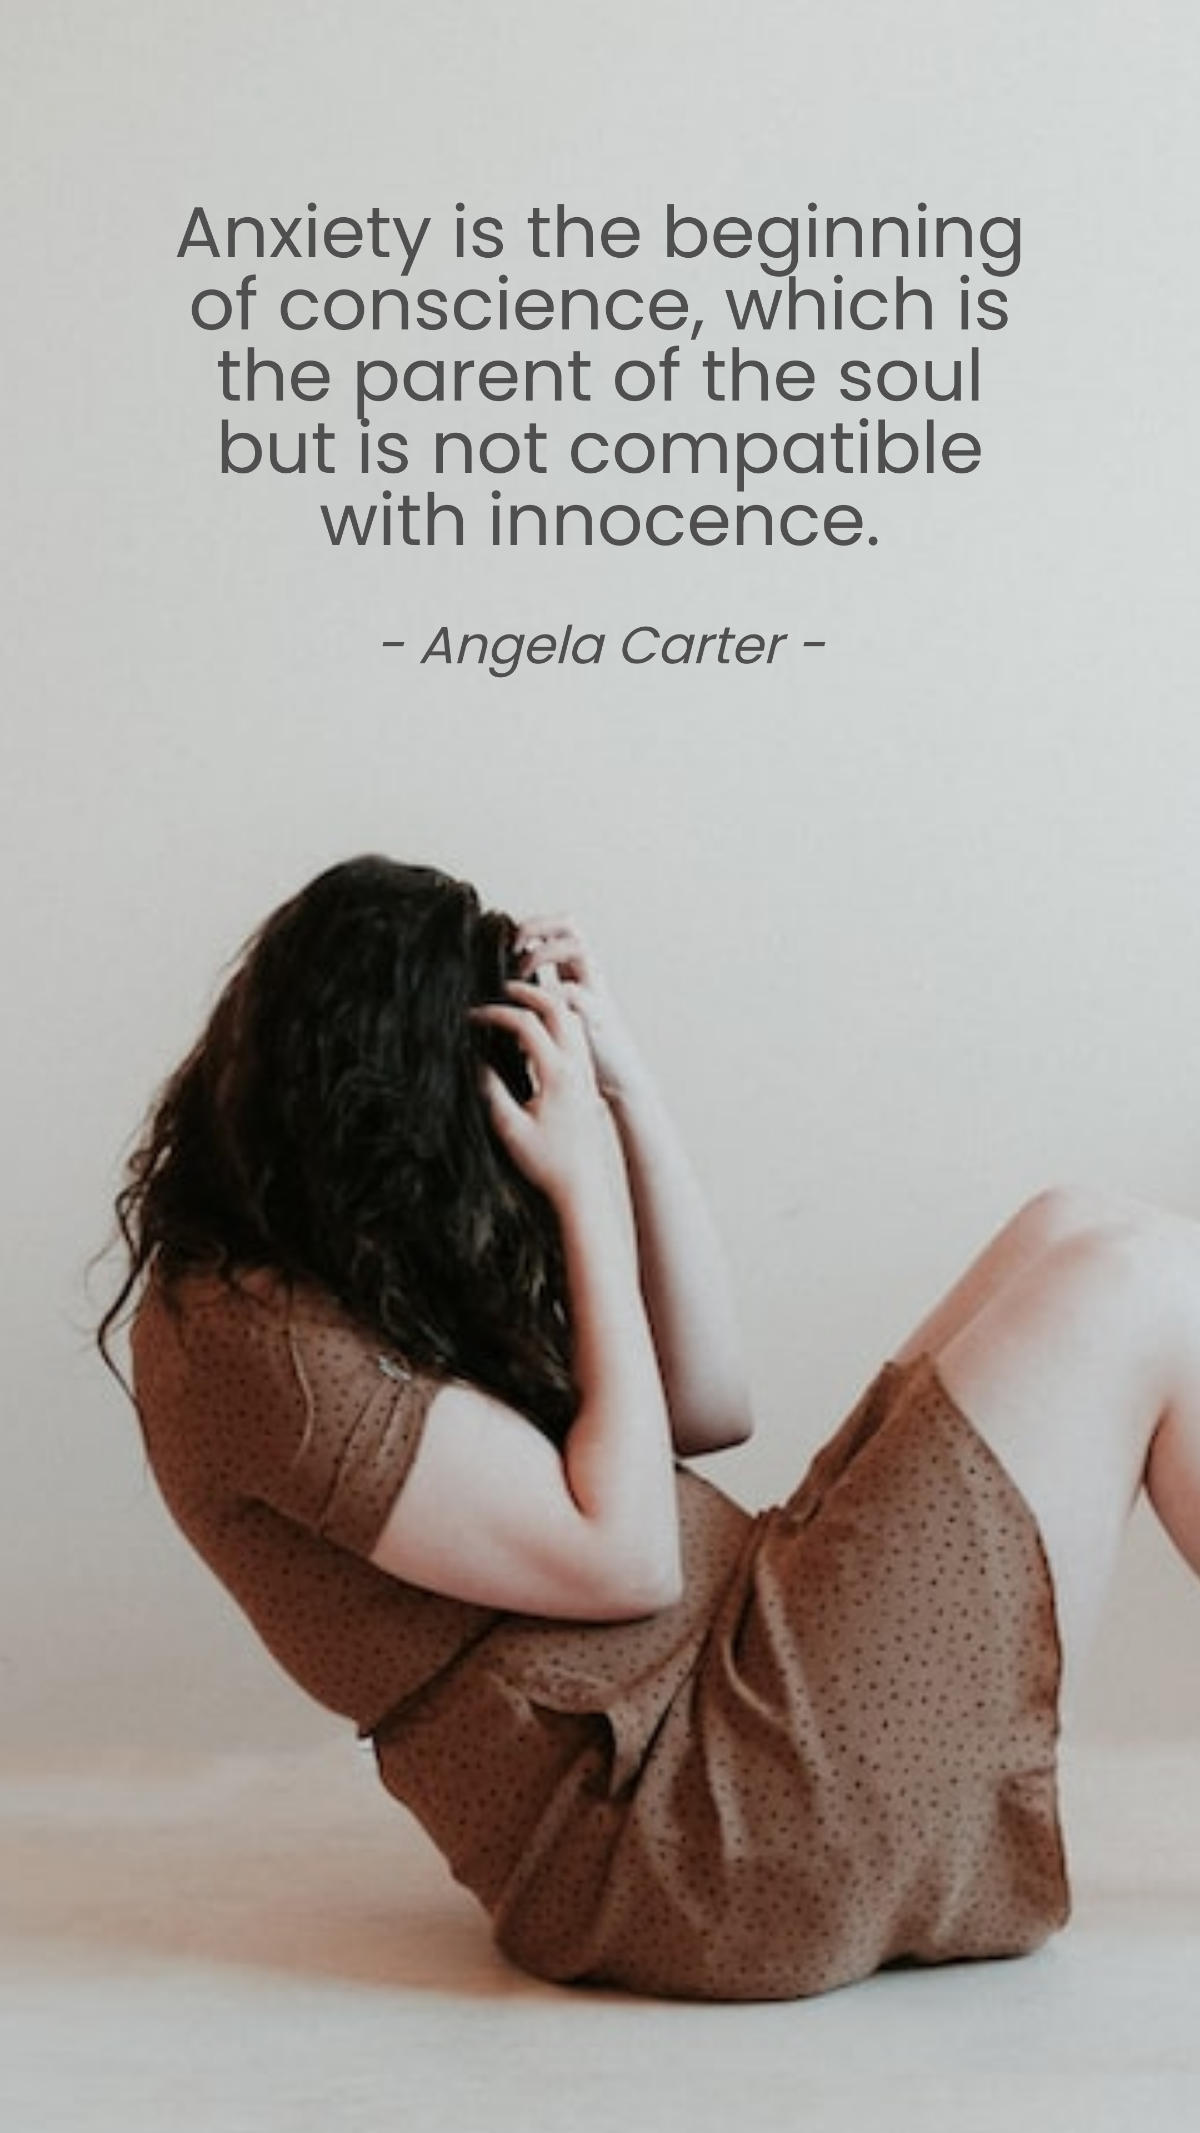 Angela Carter - Anxiety is the beginning of conscience, which is the parent of the soul but is not compatible with innocence. Template